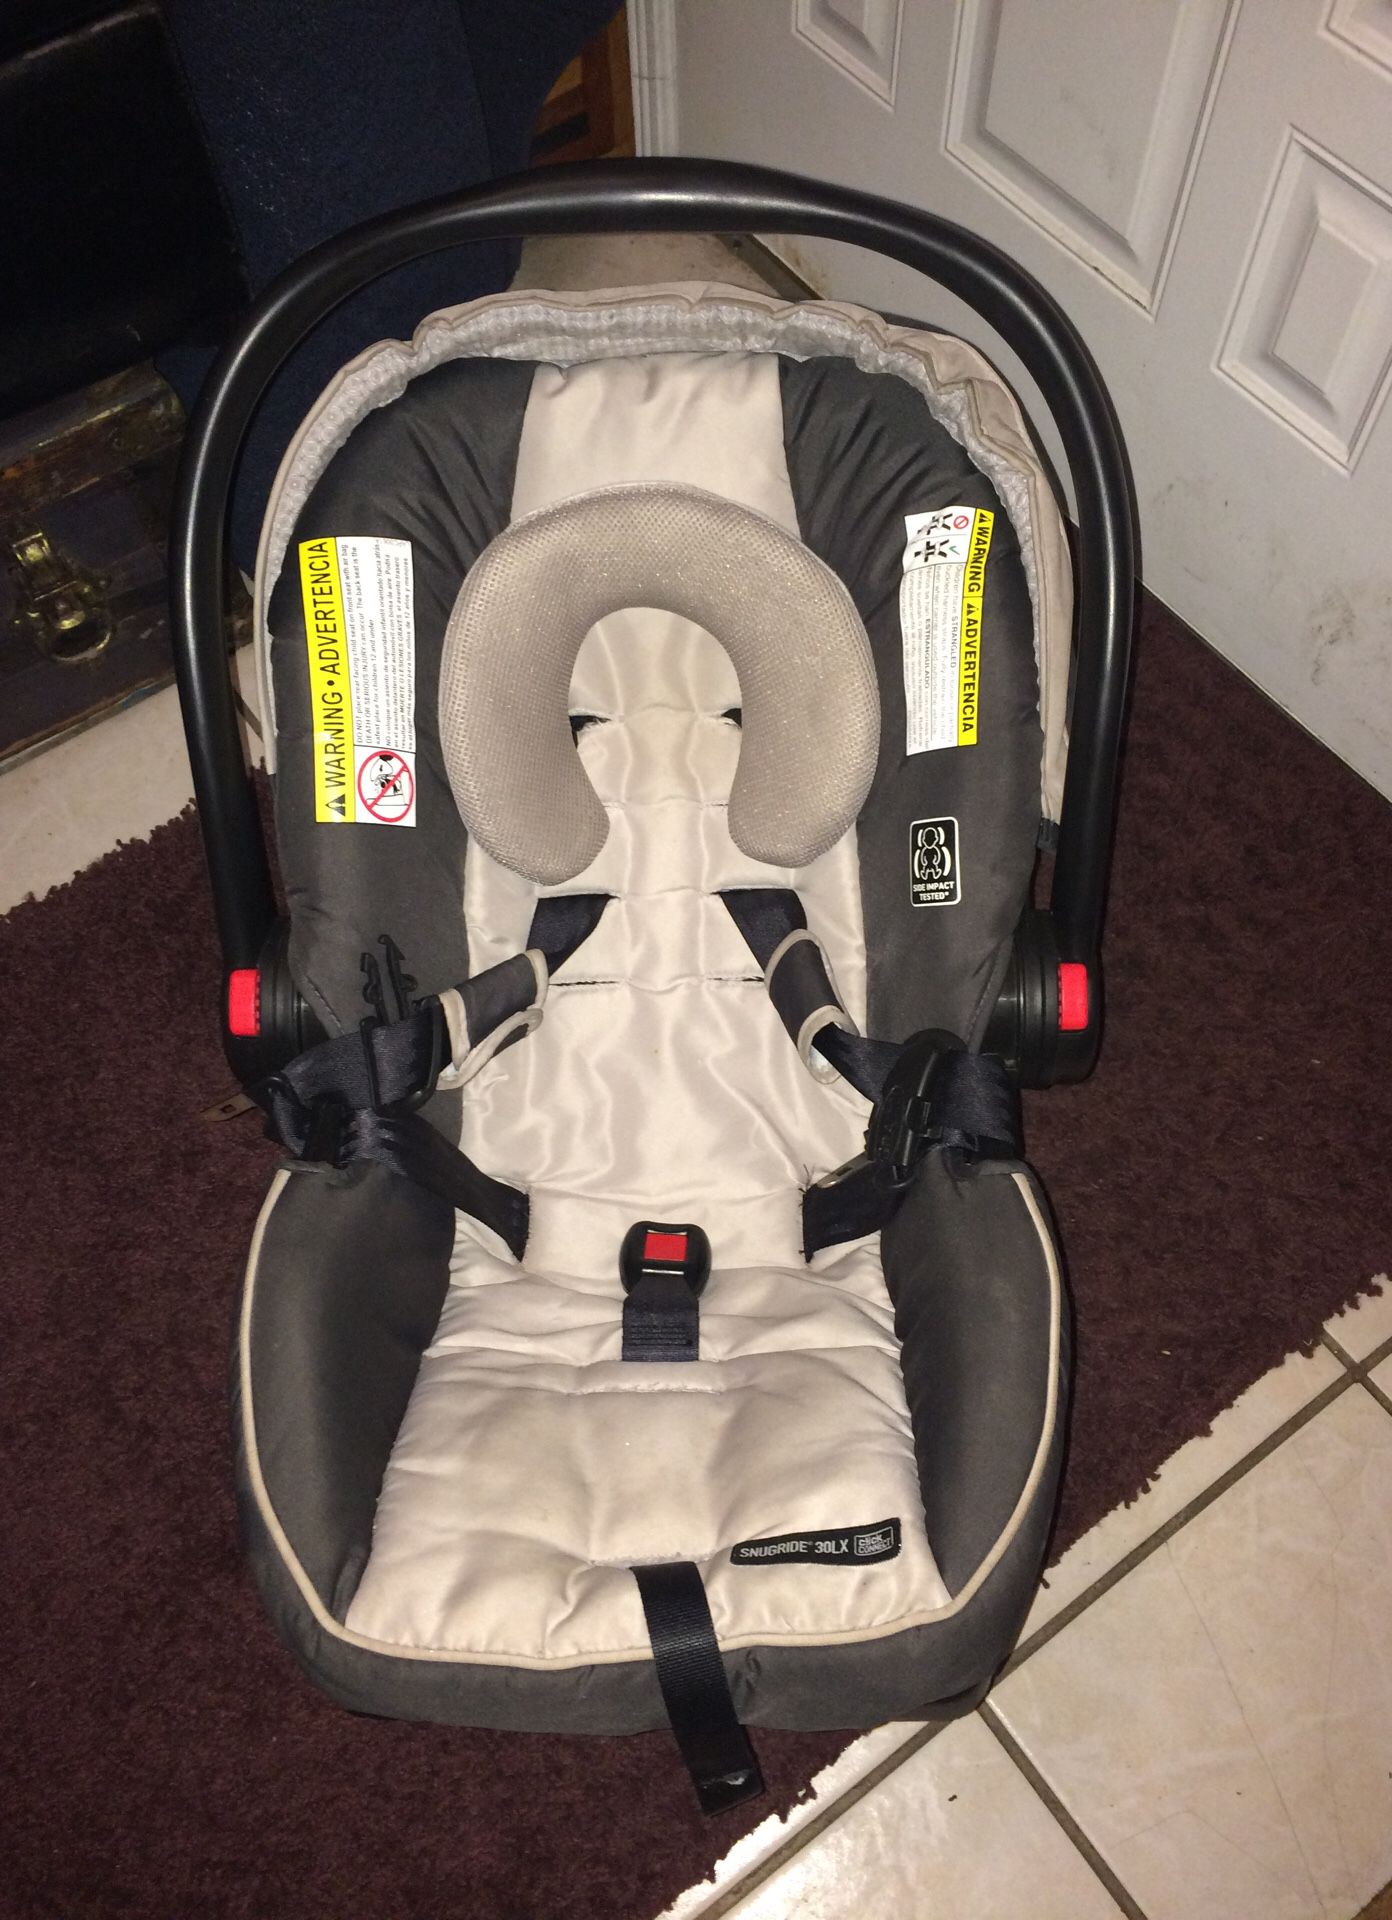 Graco SnugRide 30LX infant carseat and base